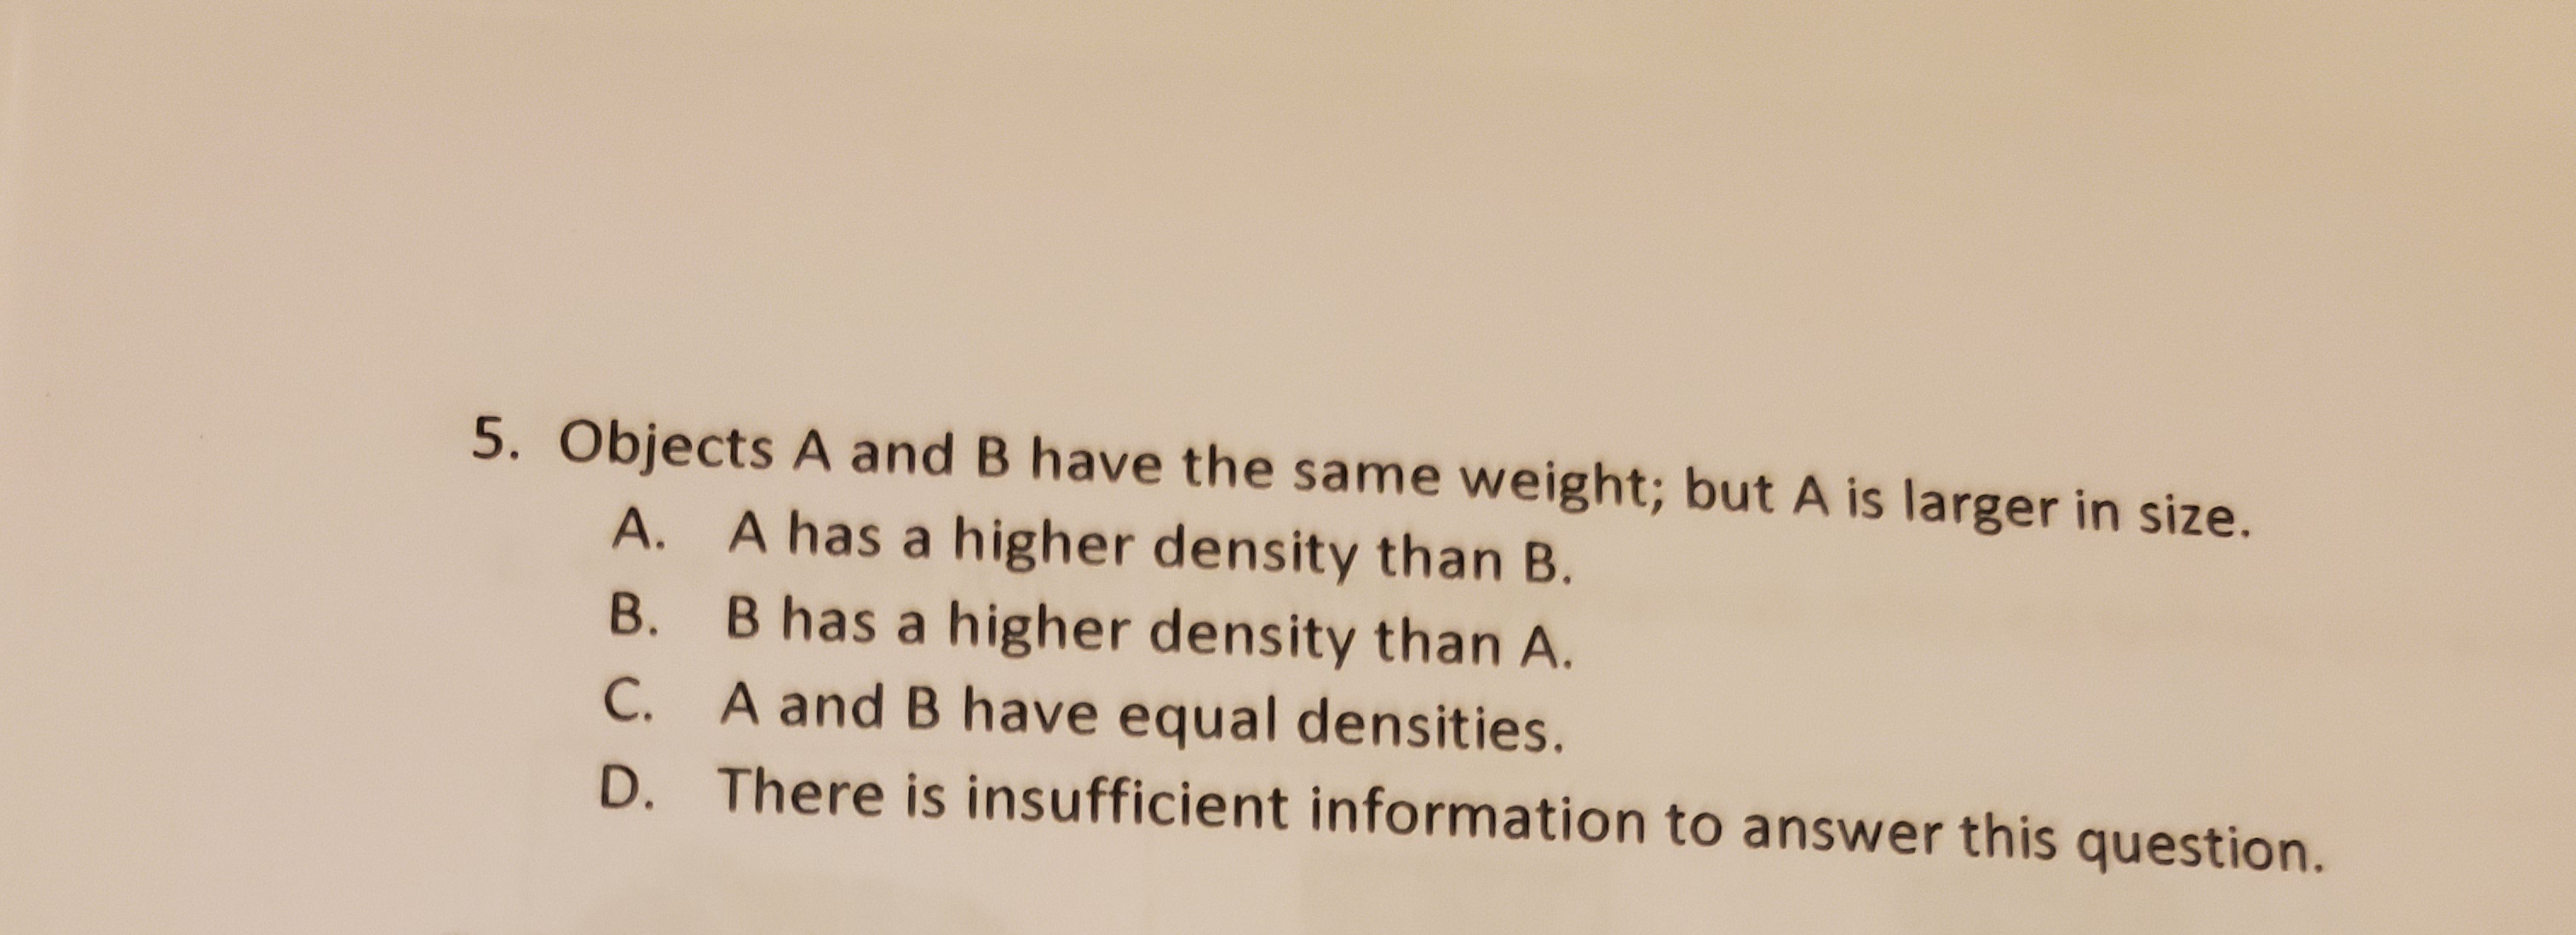 5. Objects A and B have the same weight; but A is larger in size.
A. A has a higher density than B.
B. B has a higher density than A.
C. A and B have equal densities.
D. There is insufficient information to answer this question.
